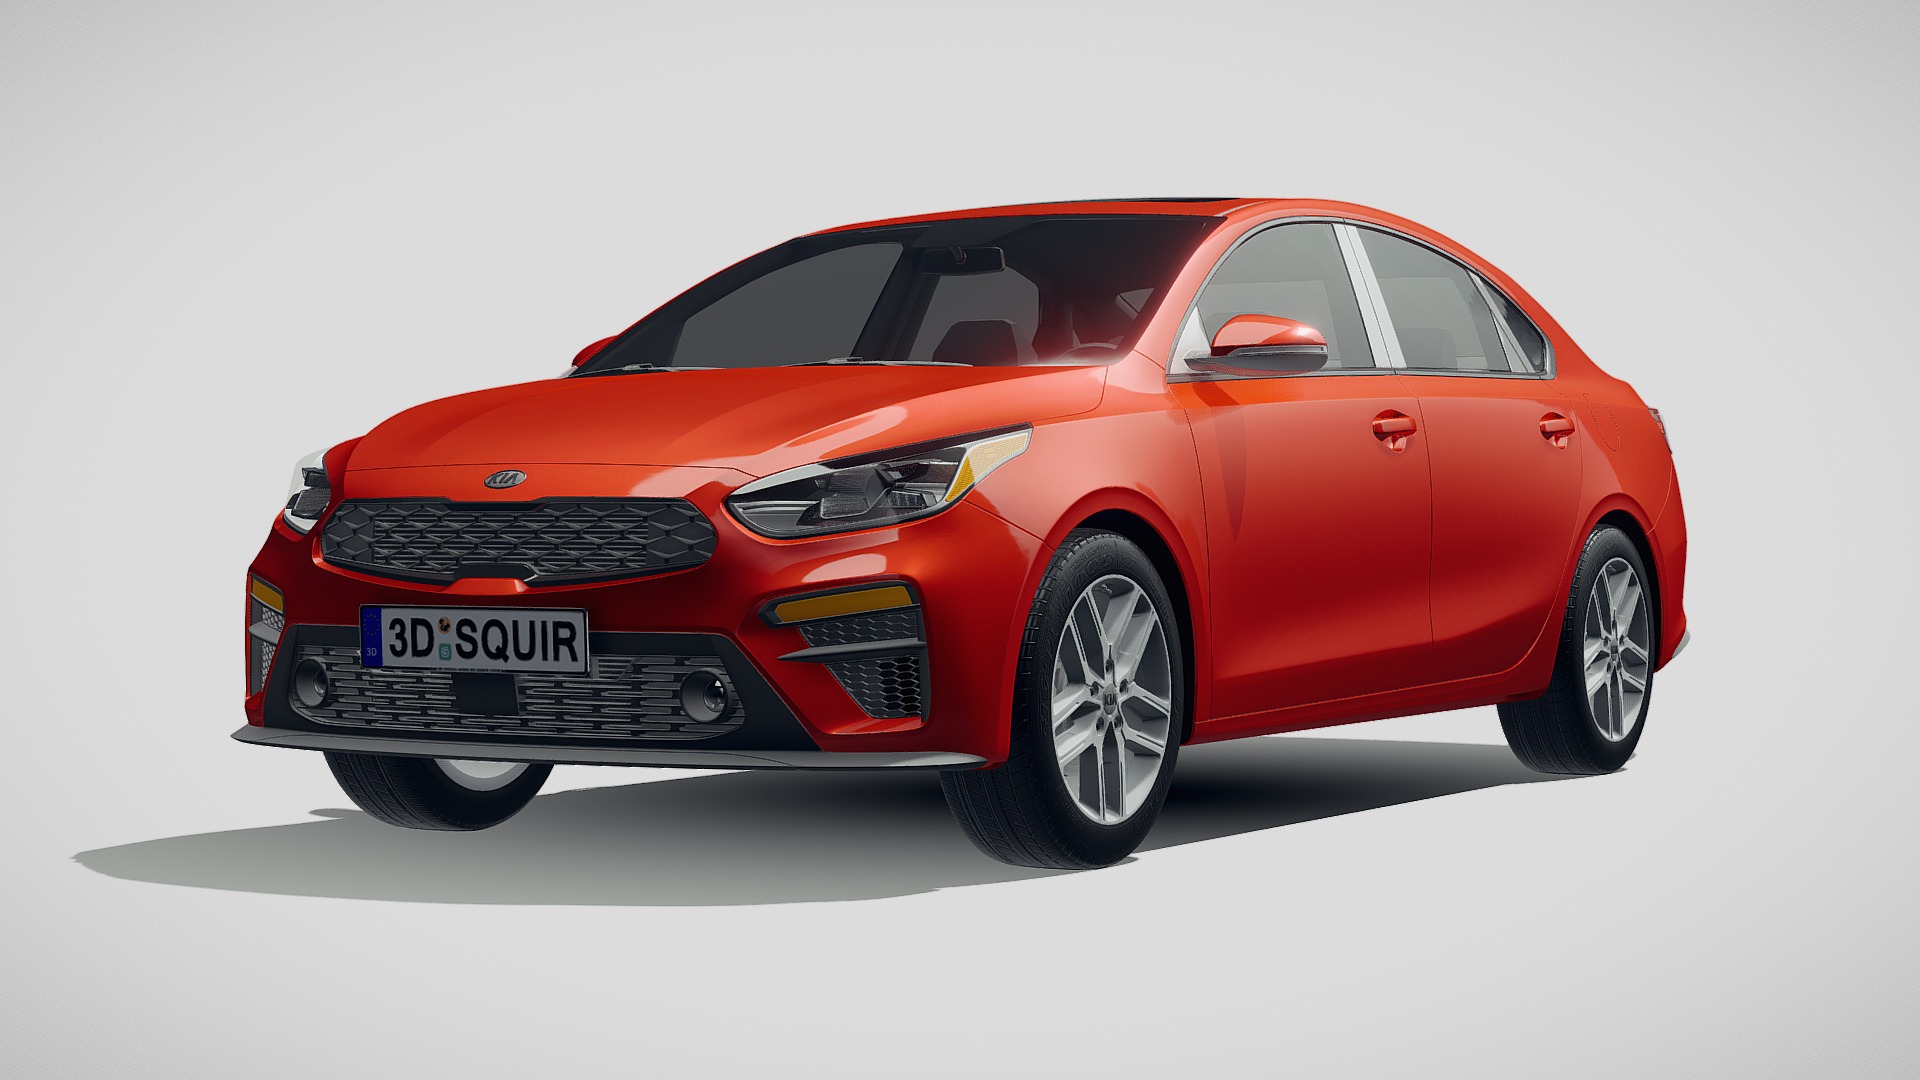 3D model Kia Forte 2019 - This is a 3D model of the Kia Forte 2019. The 3D model is about a red car with a white background.